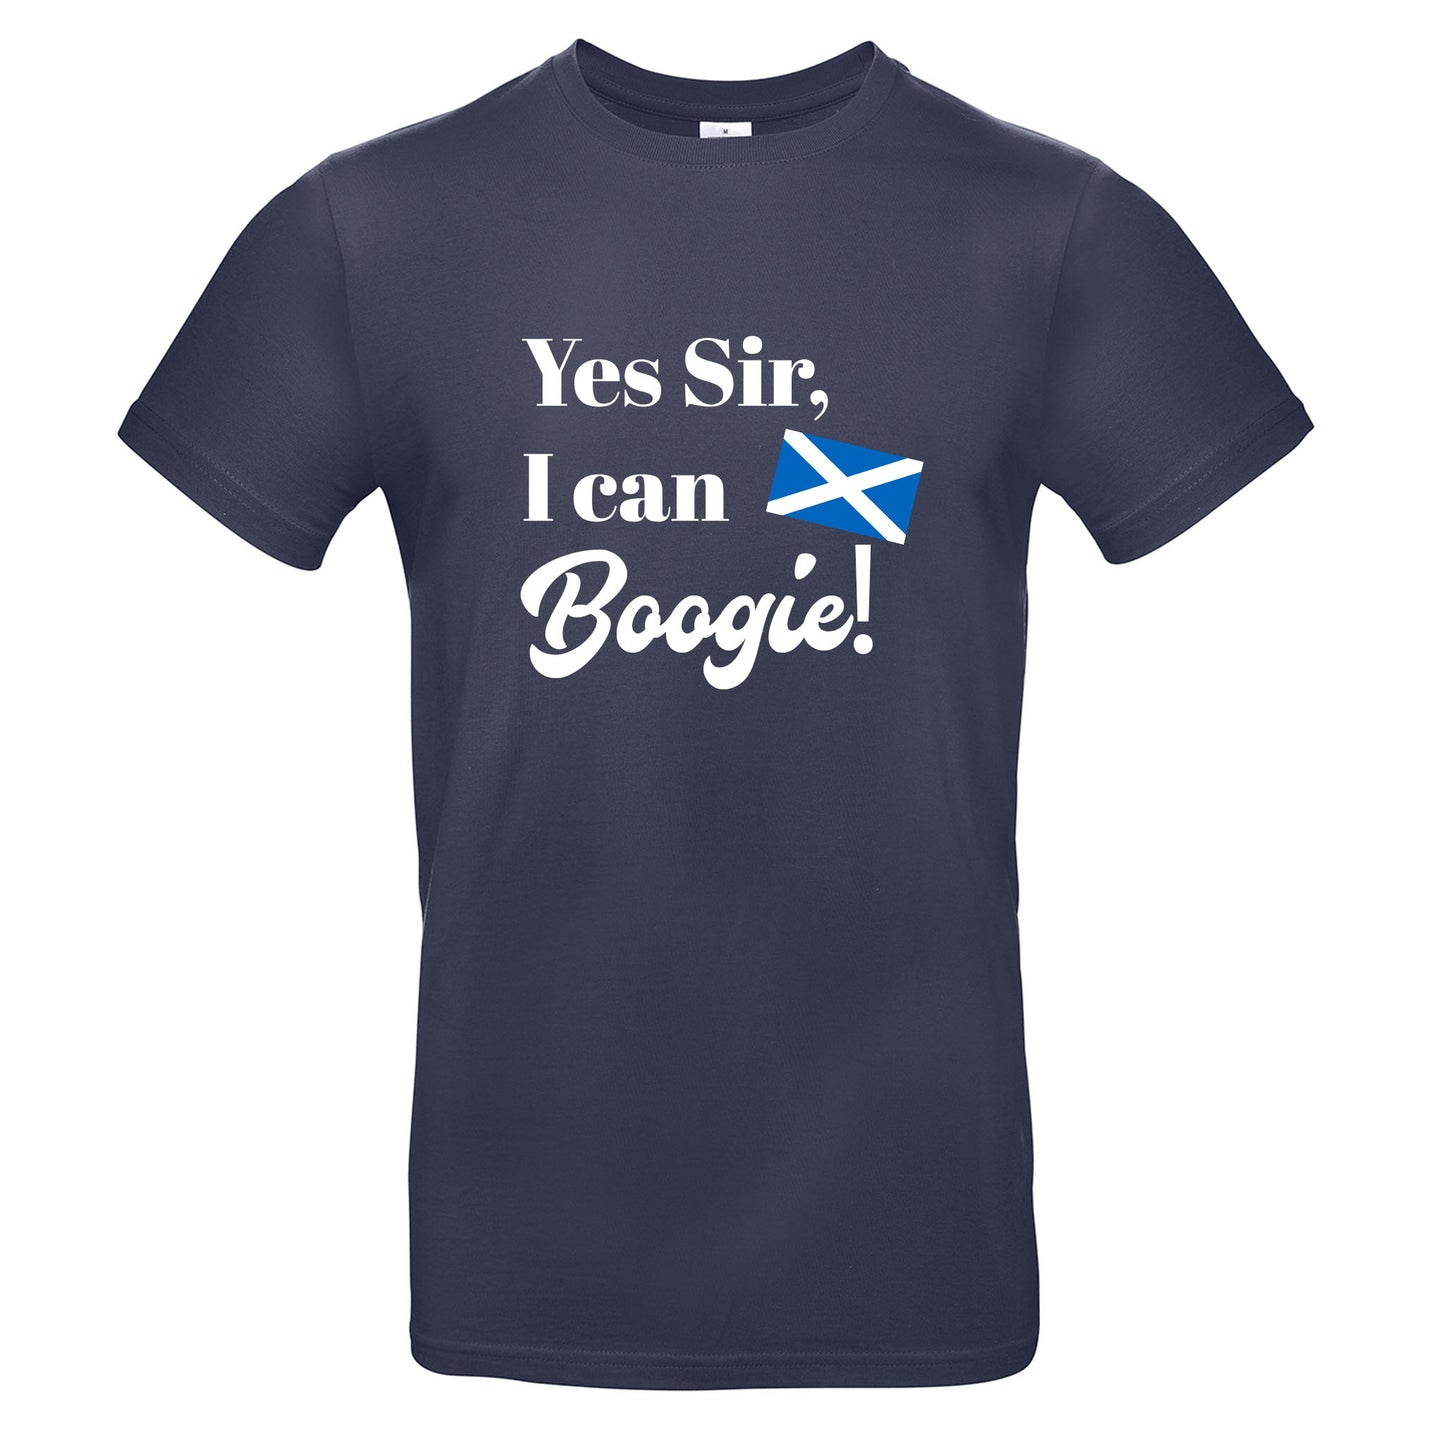 Yes Sir, I can Boogie Scotland - T-Shirt ADULT